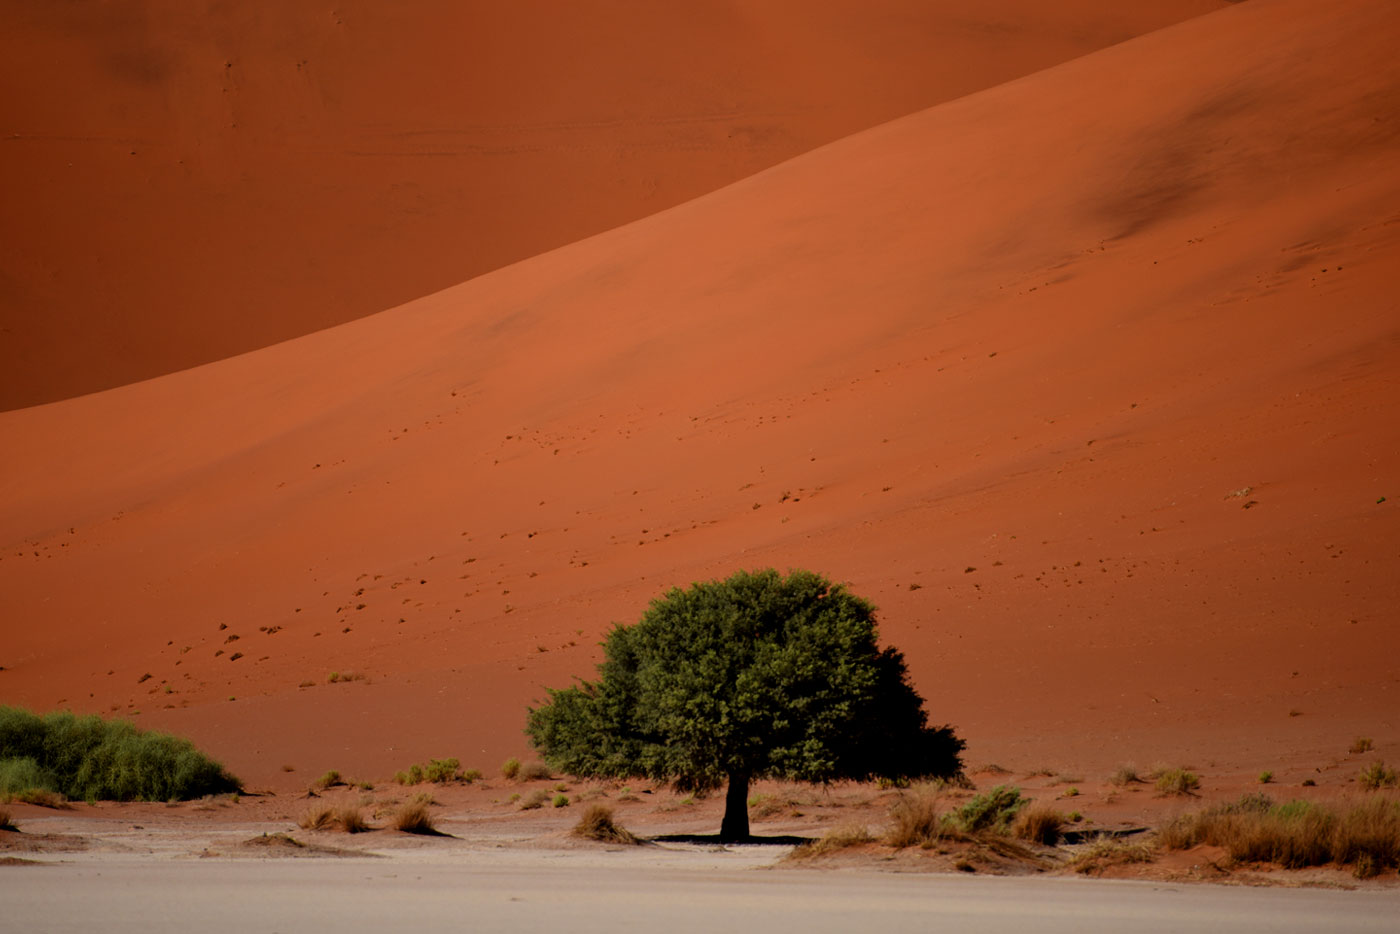 Travel guides and blogs about Namibia